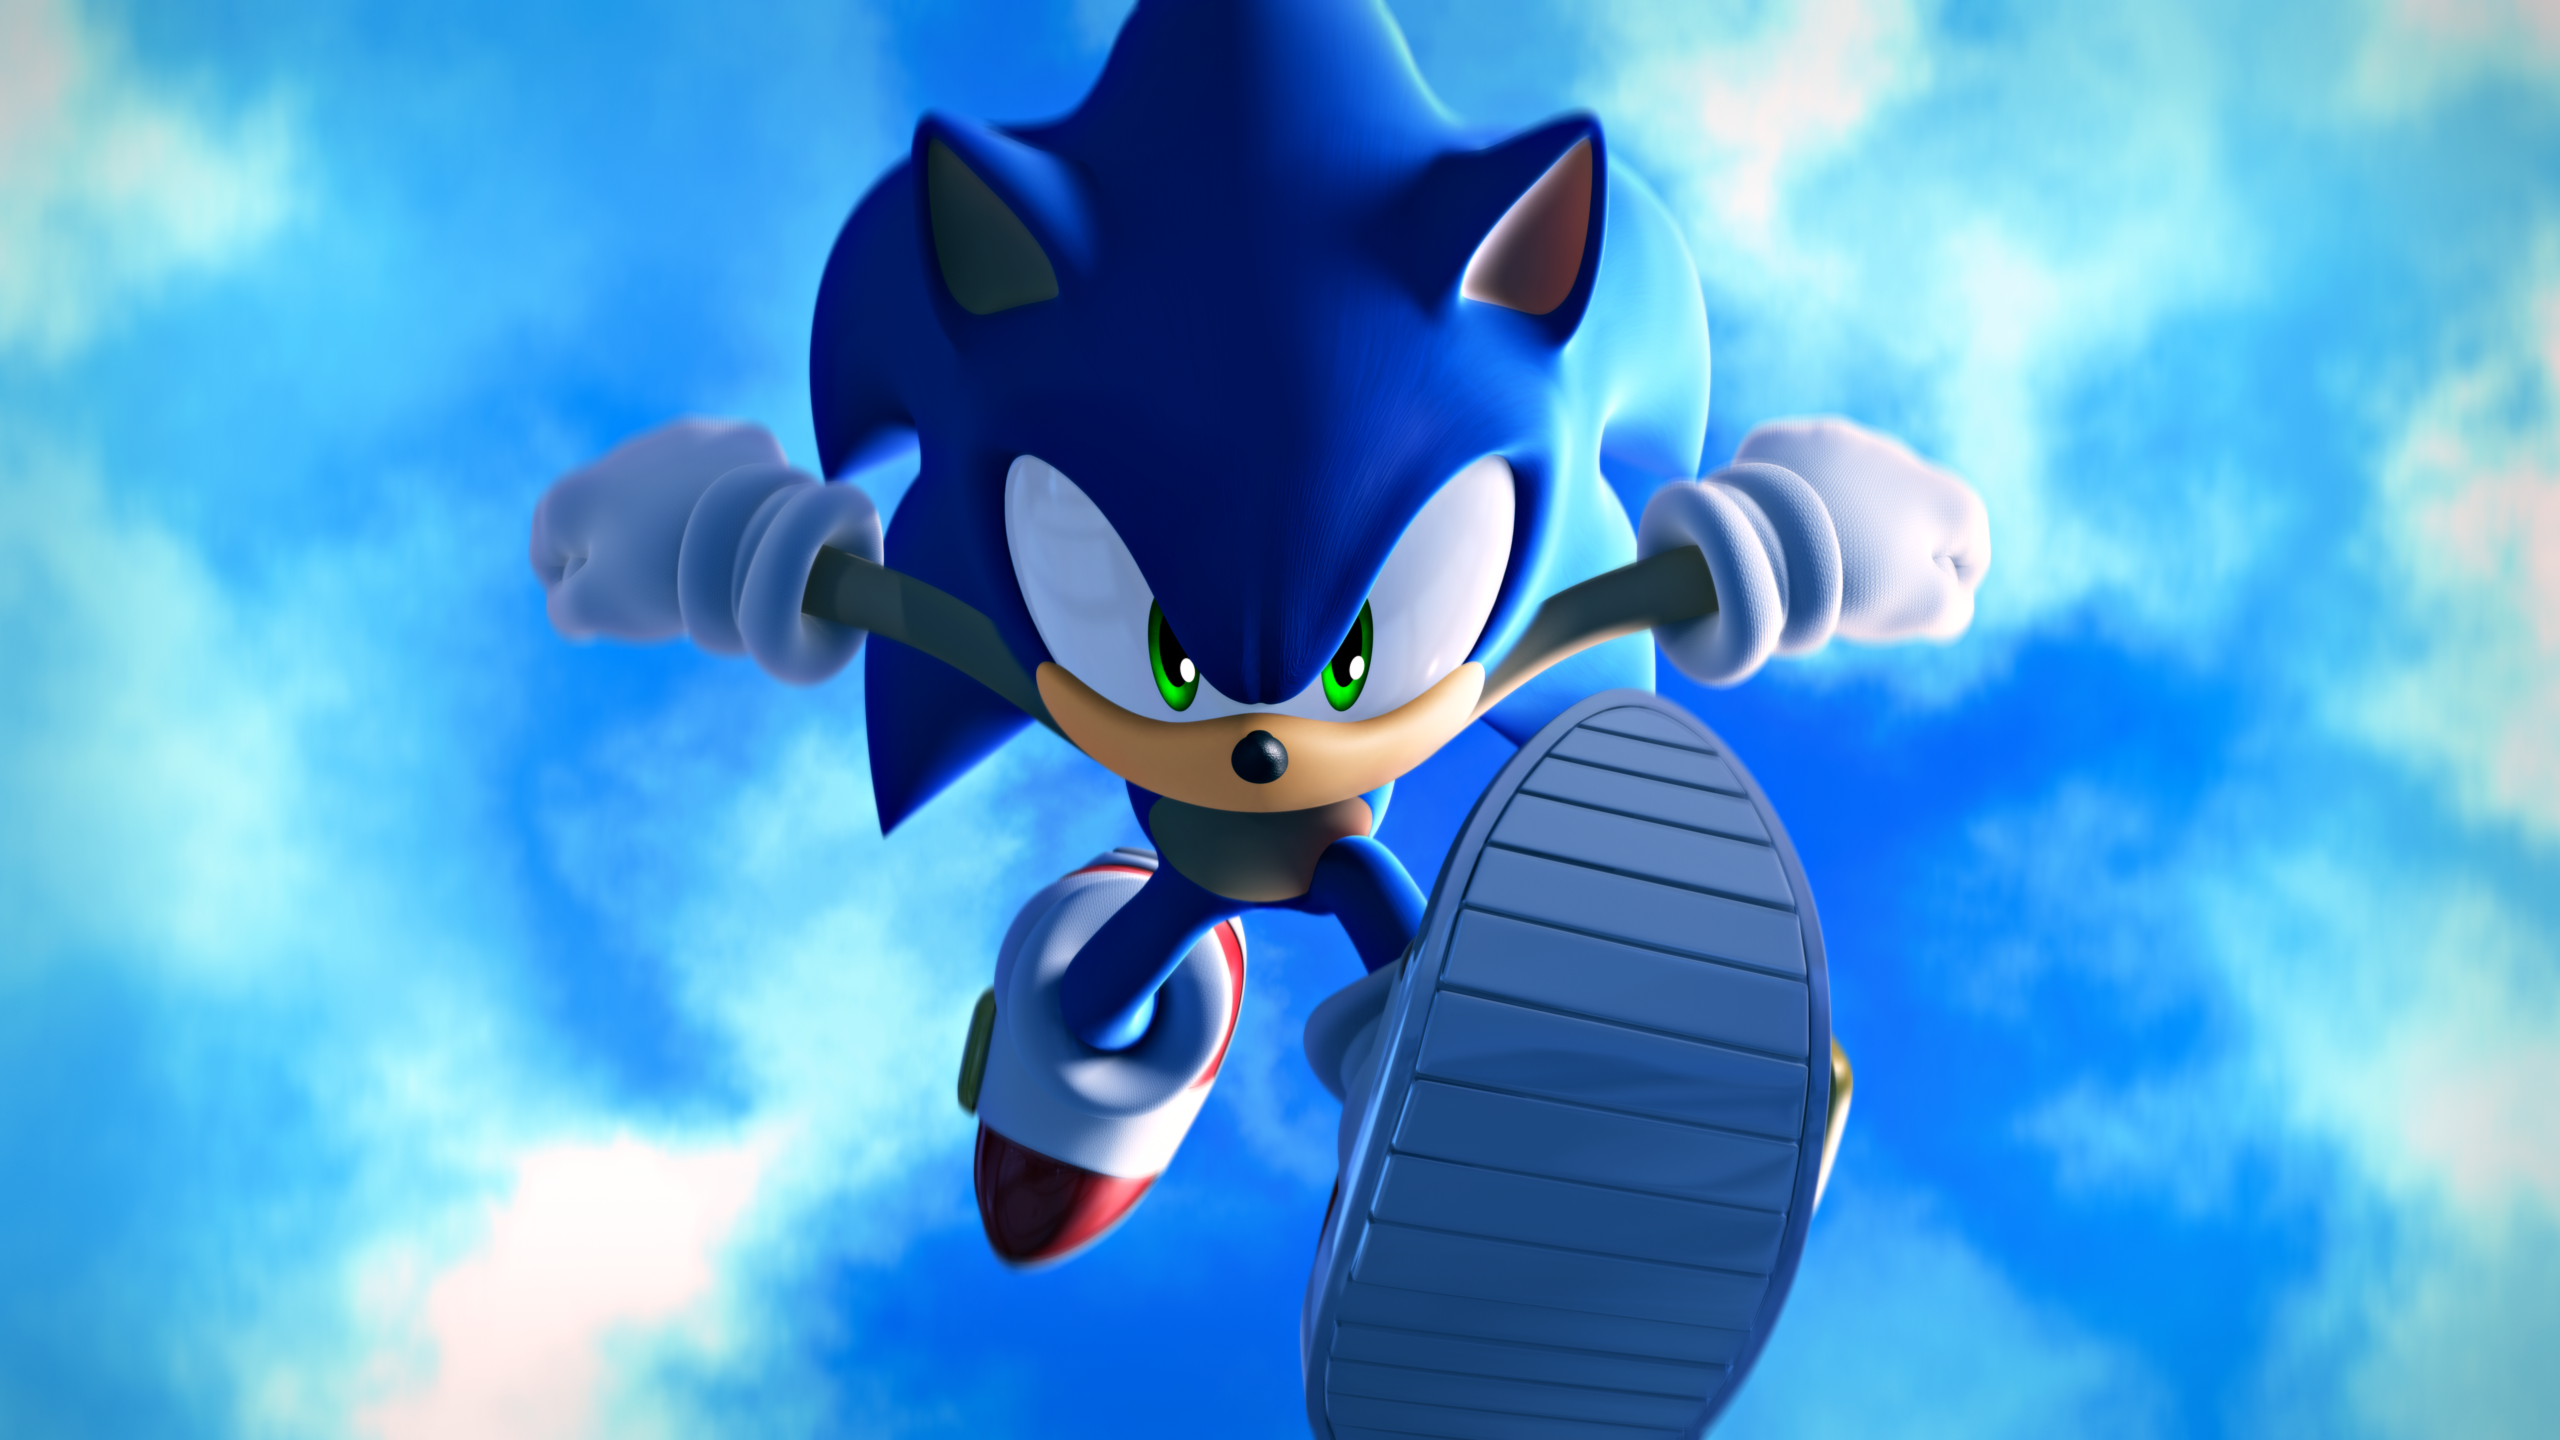 sonic_the_hedgehog_102_1__by_light_rock-d7oly2m